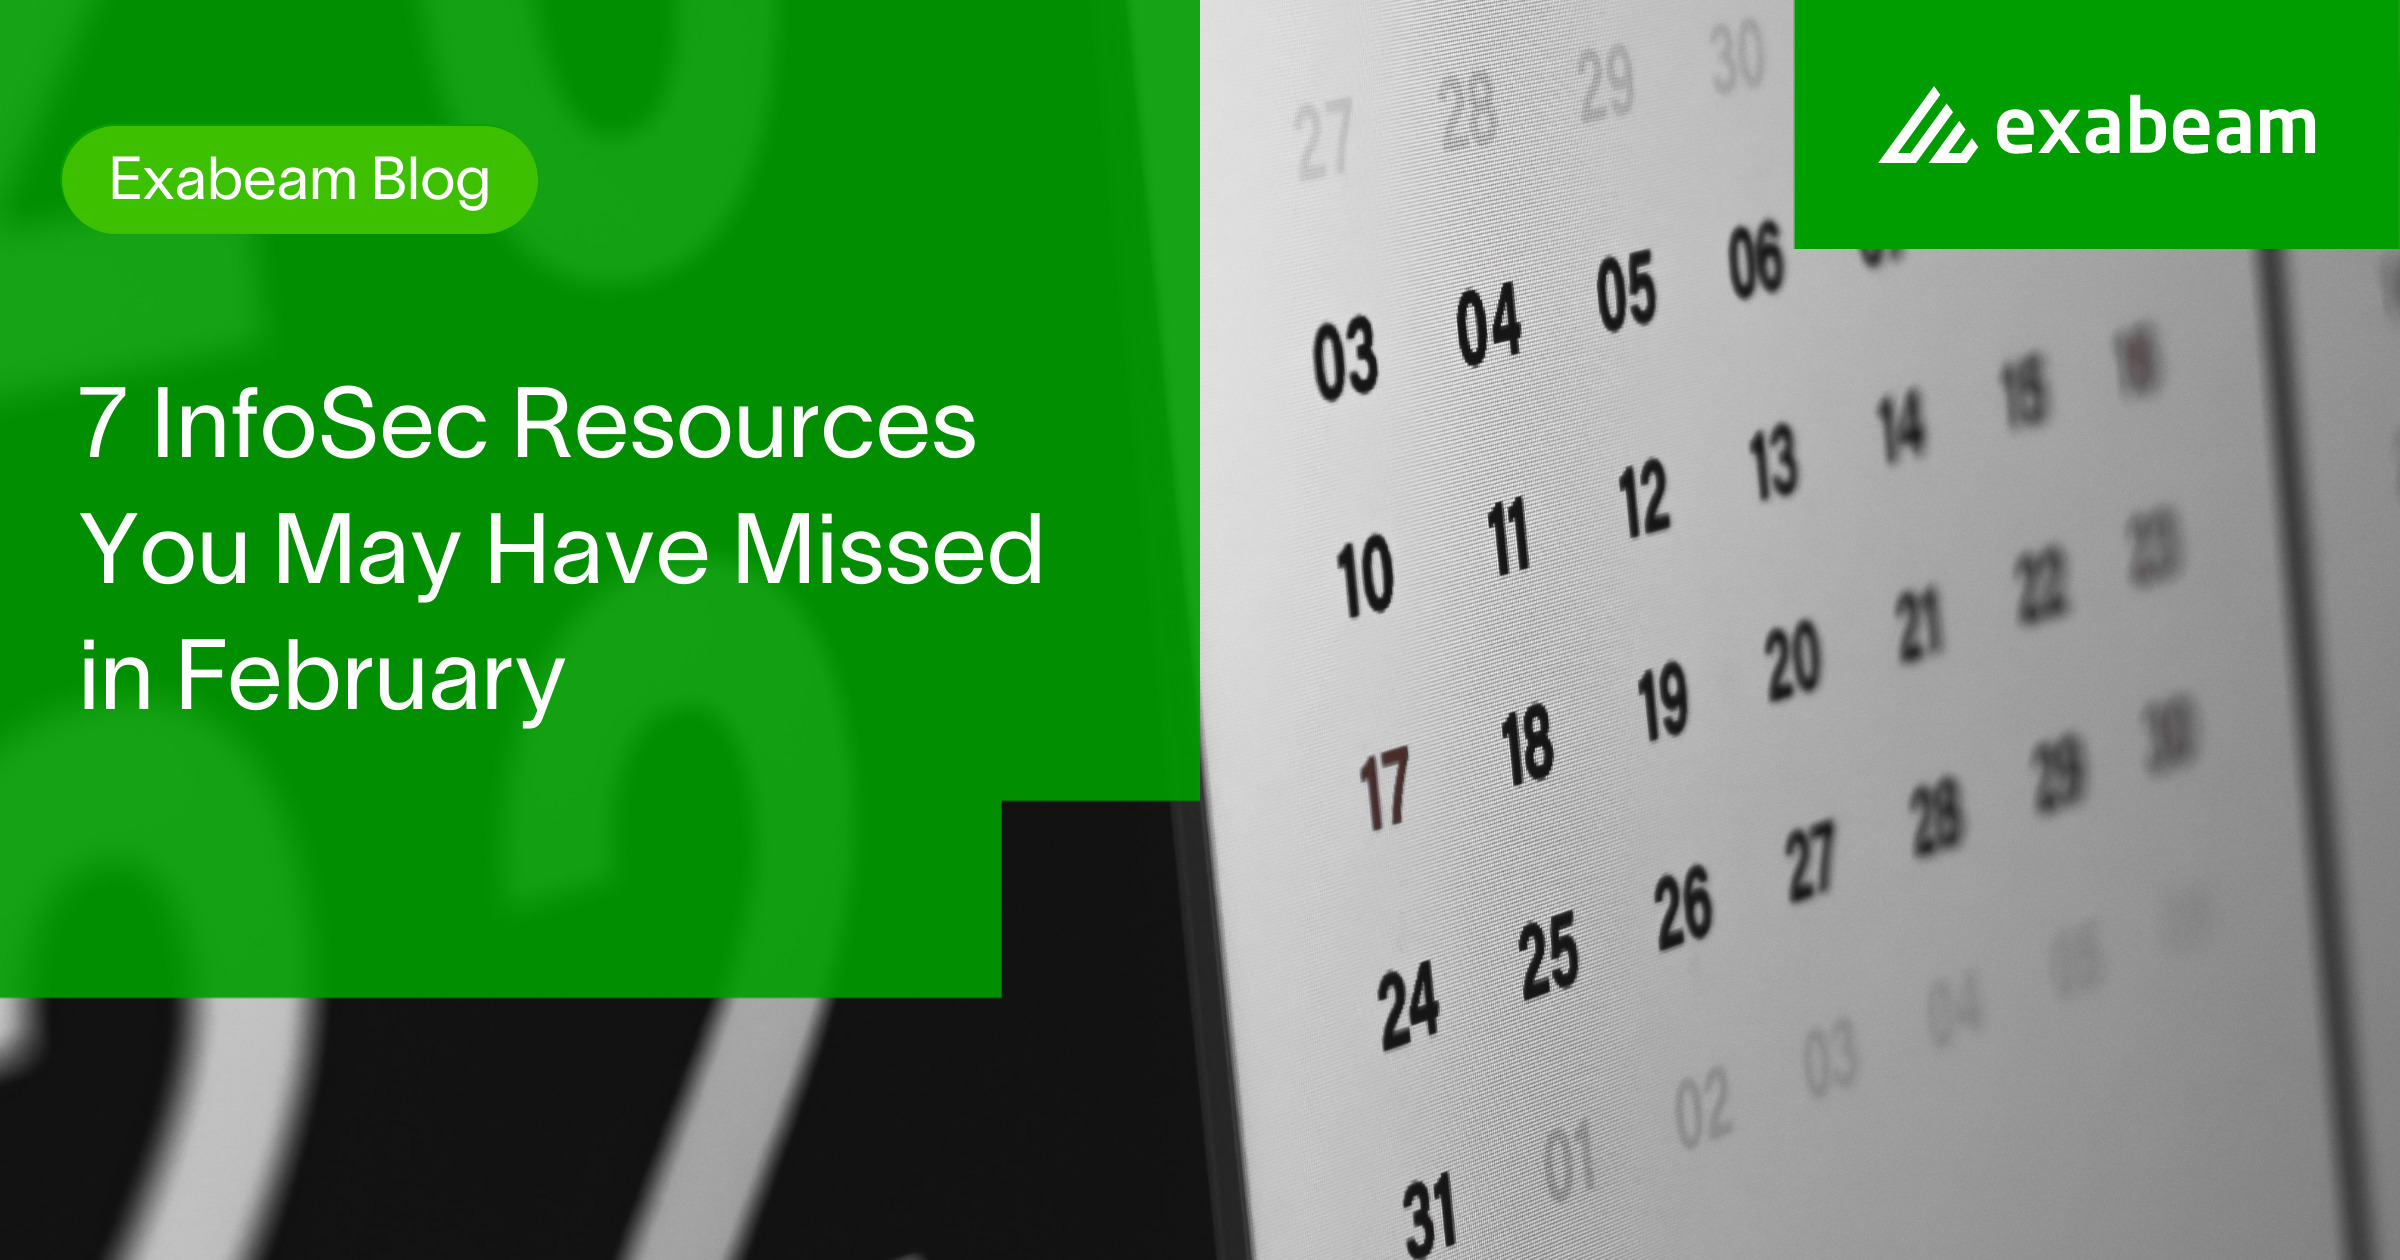 7 InfoSec Resources You May Have Missed in February